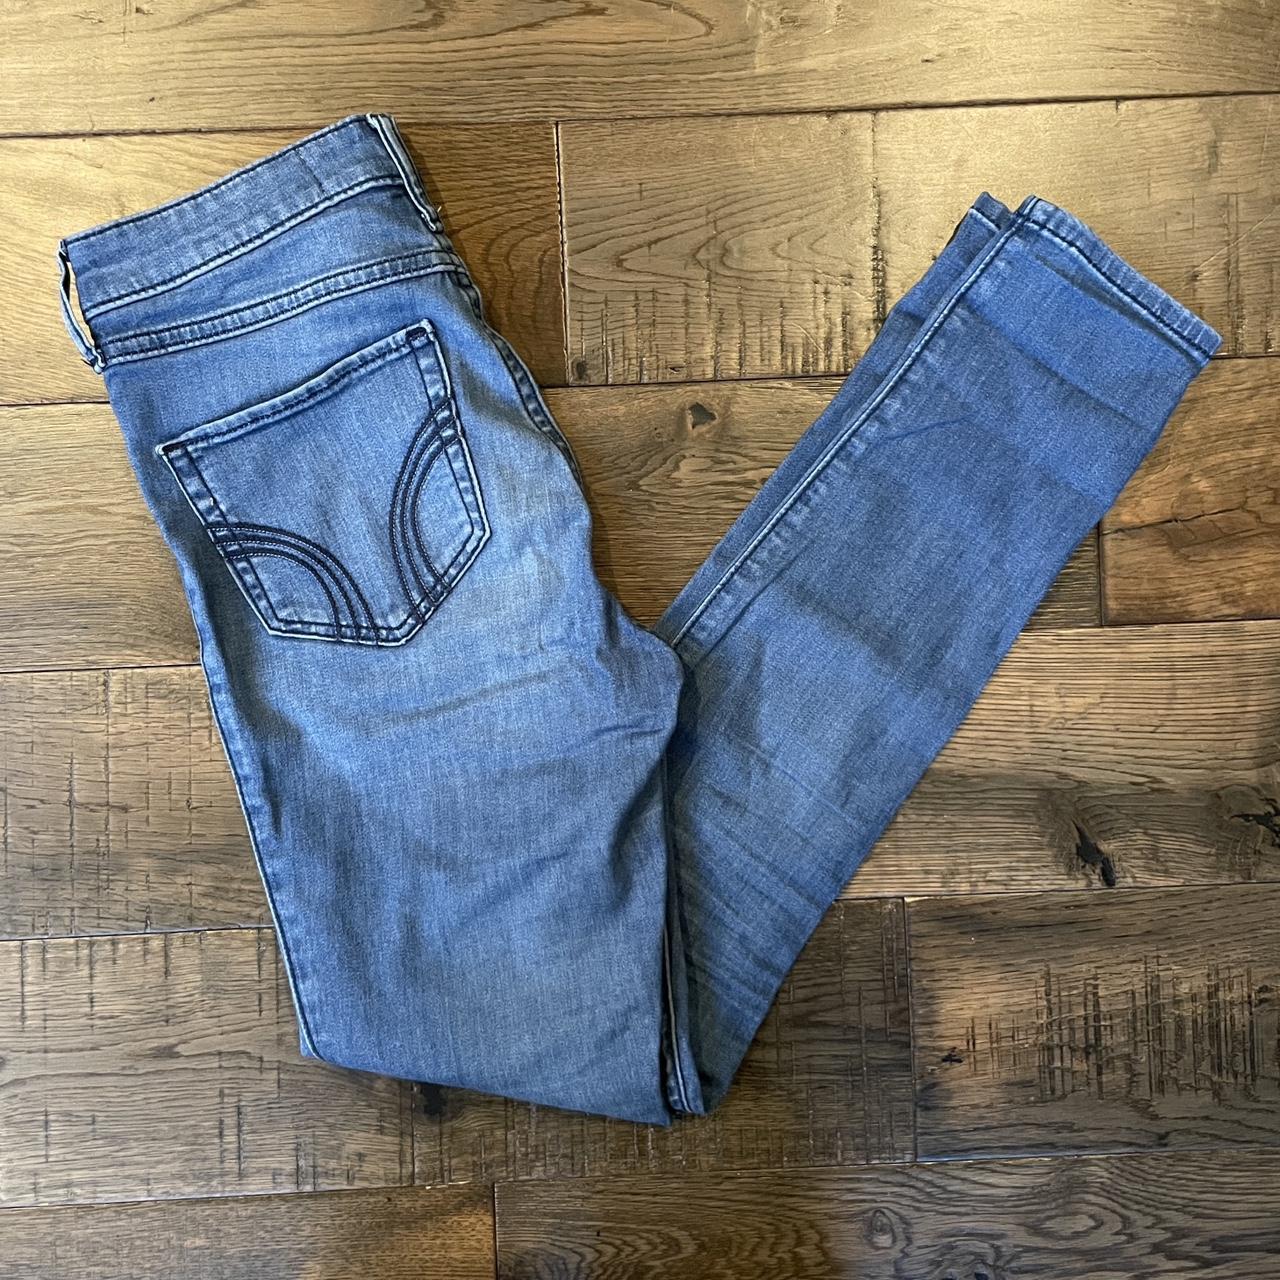 Hollister jean jeggings - clothing & accessories - by owner - apparel sale  - craigslist